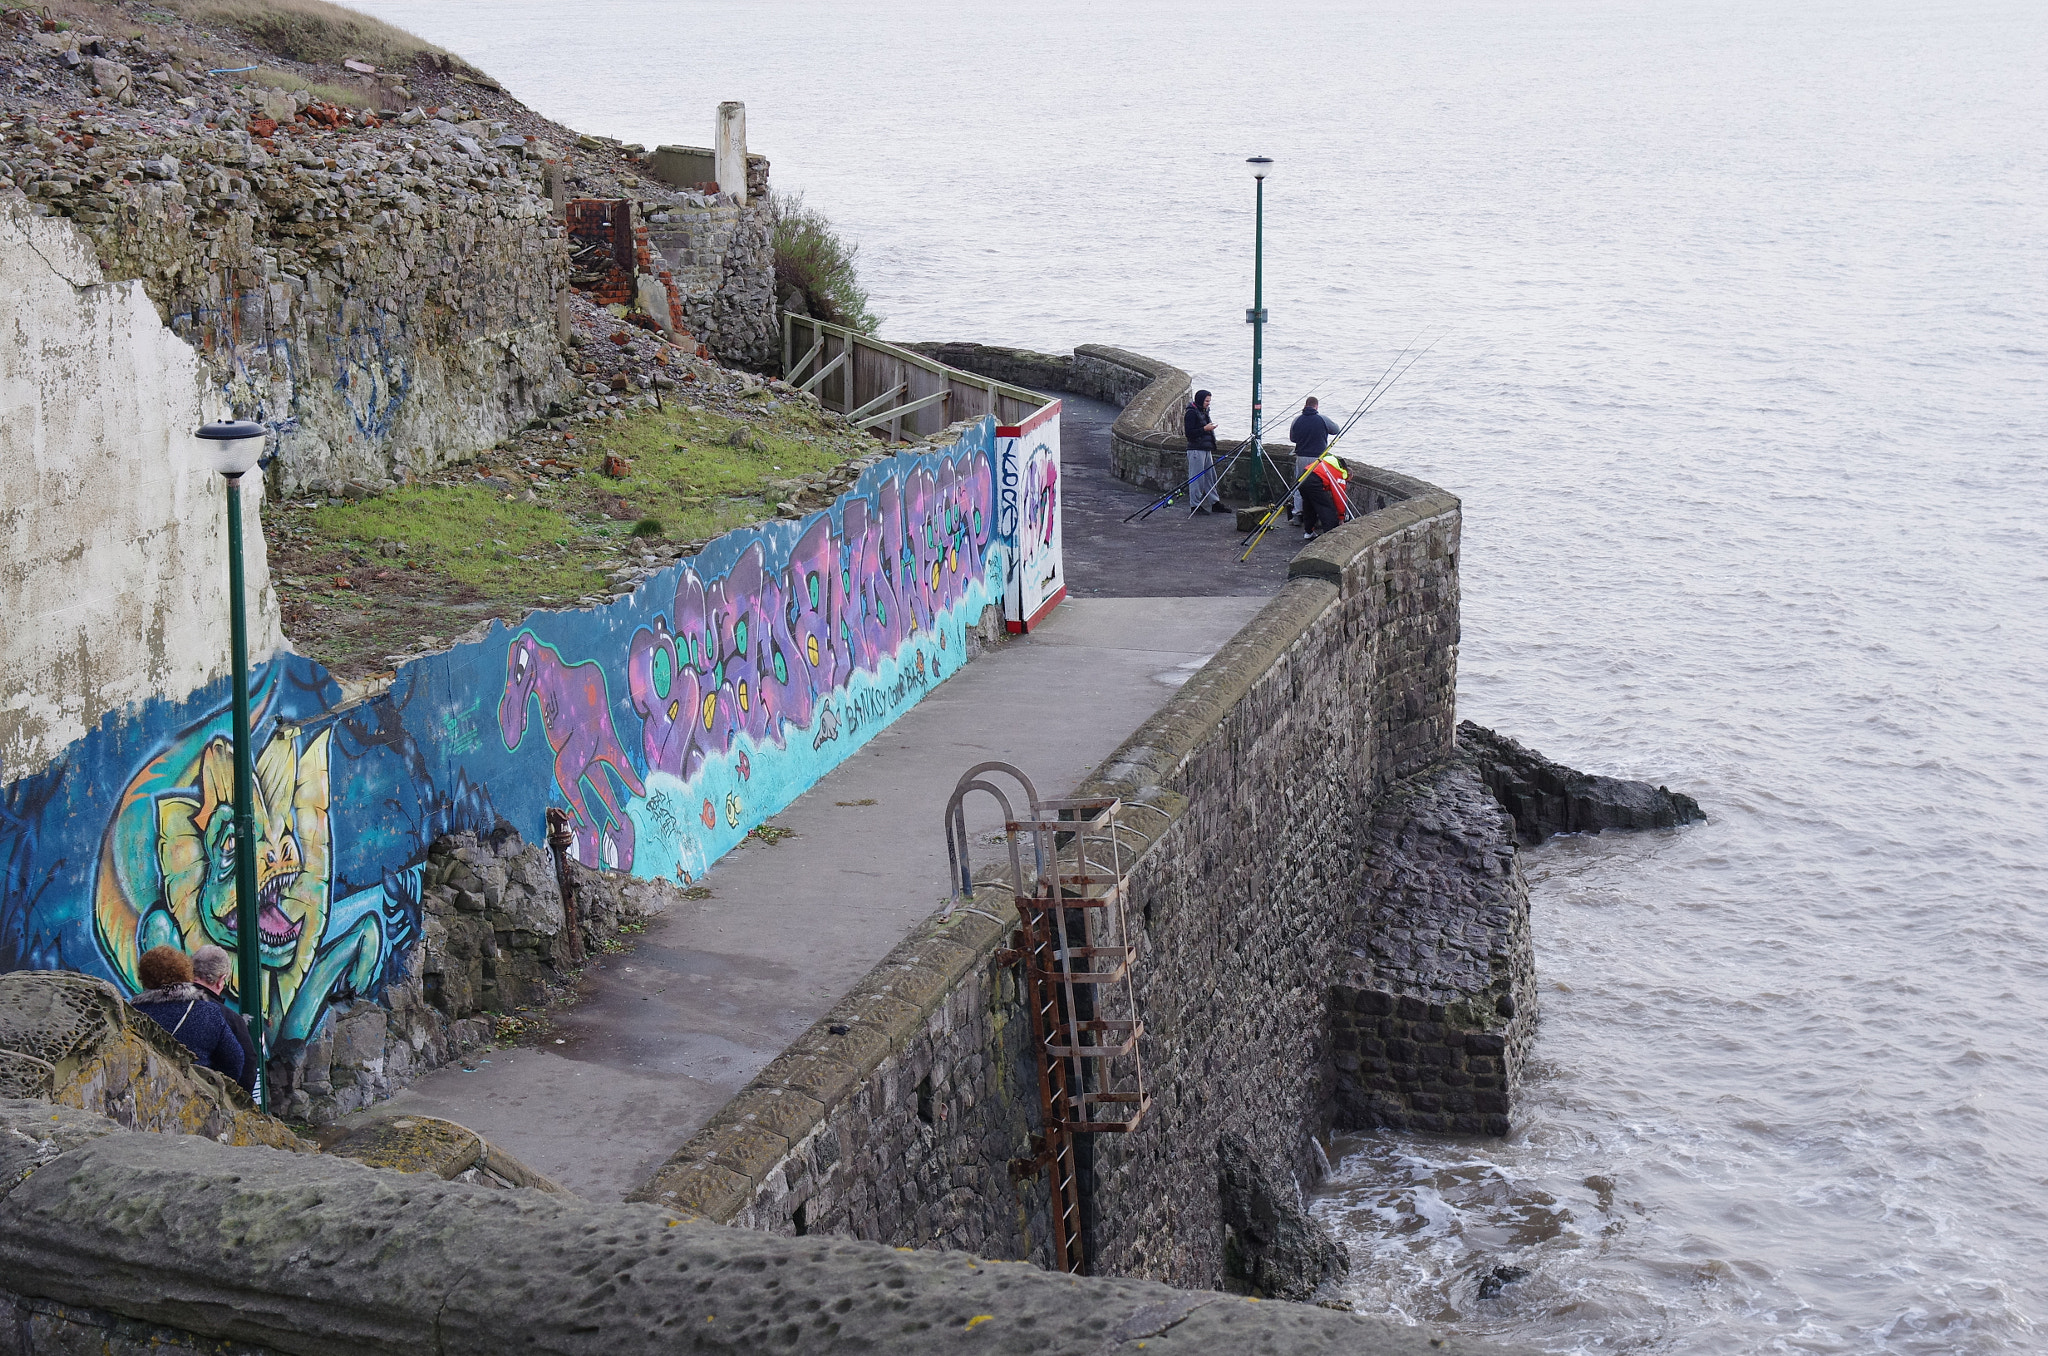 HD Pentax DA 40mm F2.8 Limited sample photo. Angling with a view to banksy's return. photography